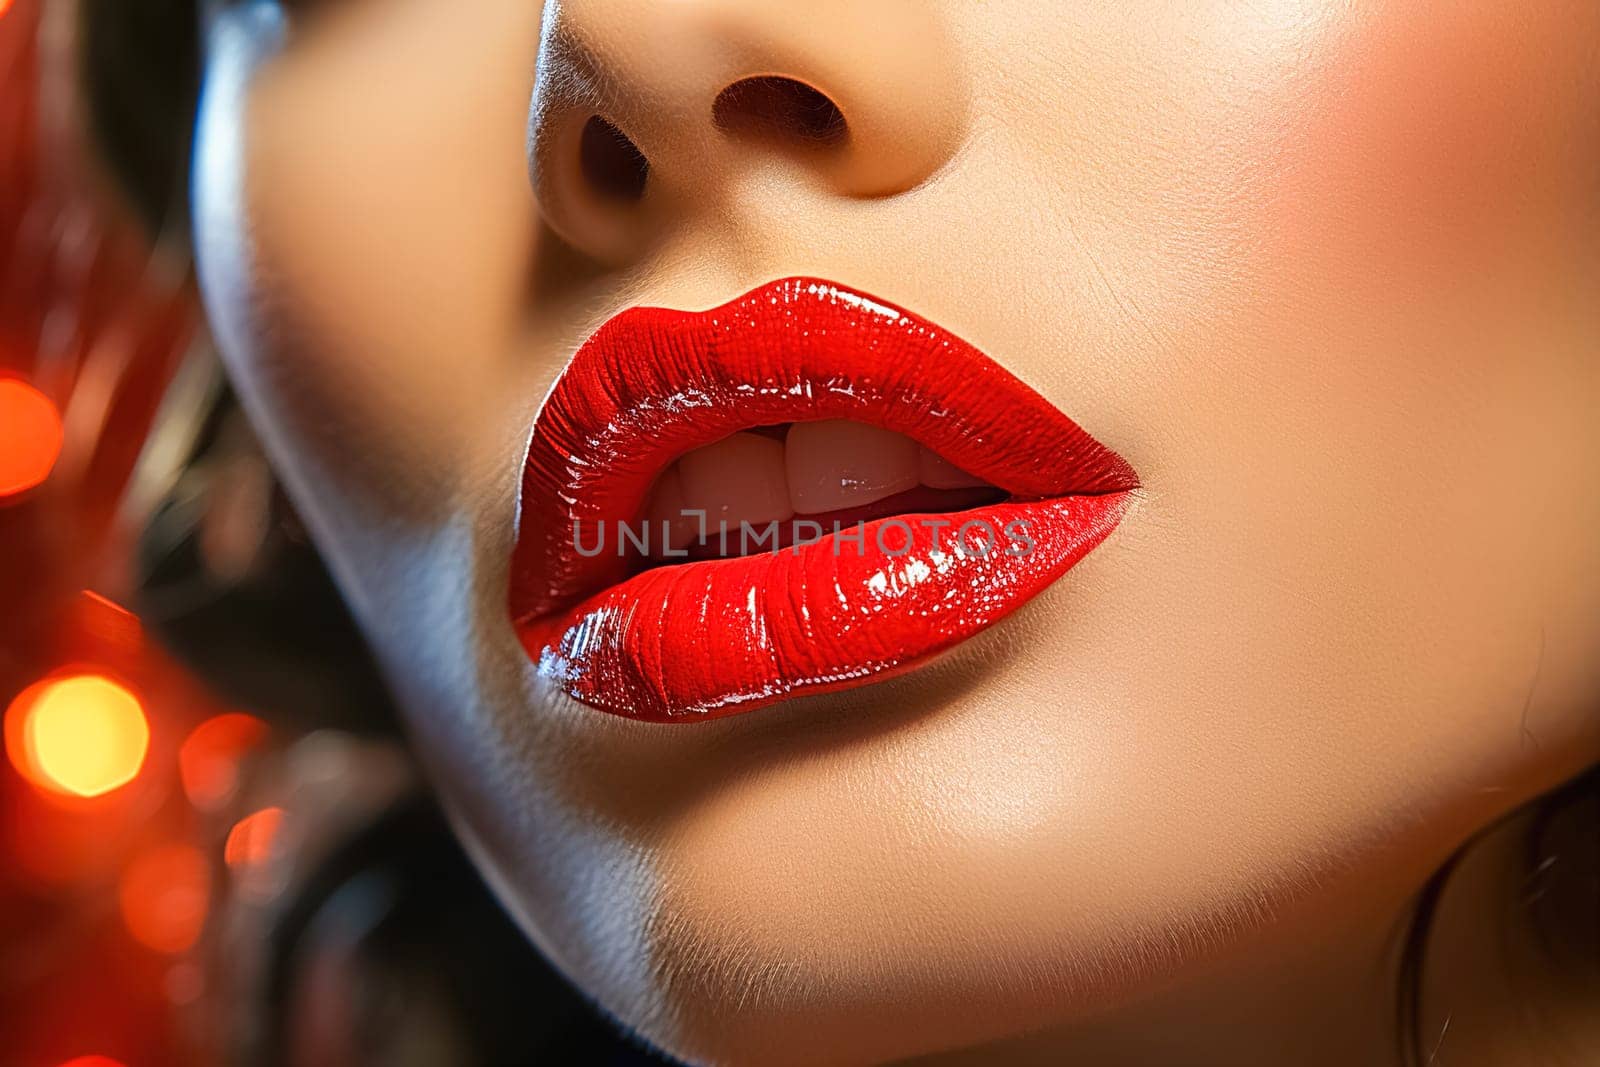 Beautiful lip makeup with red lipstick close-up. by Yurich32